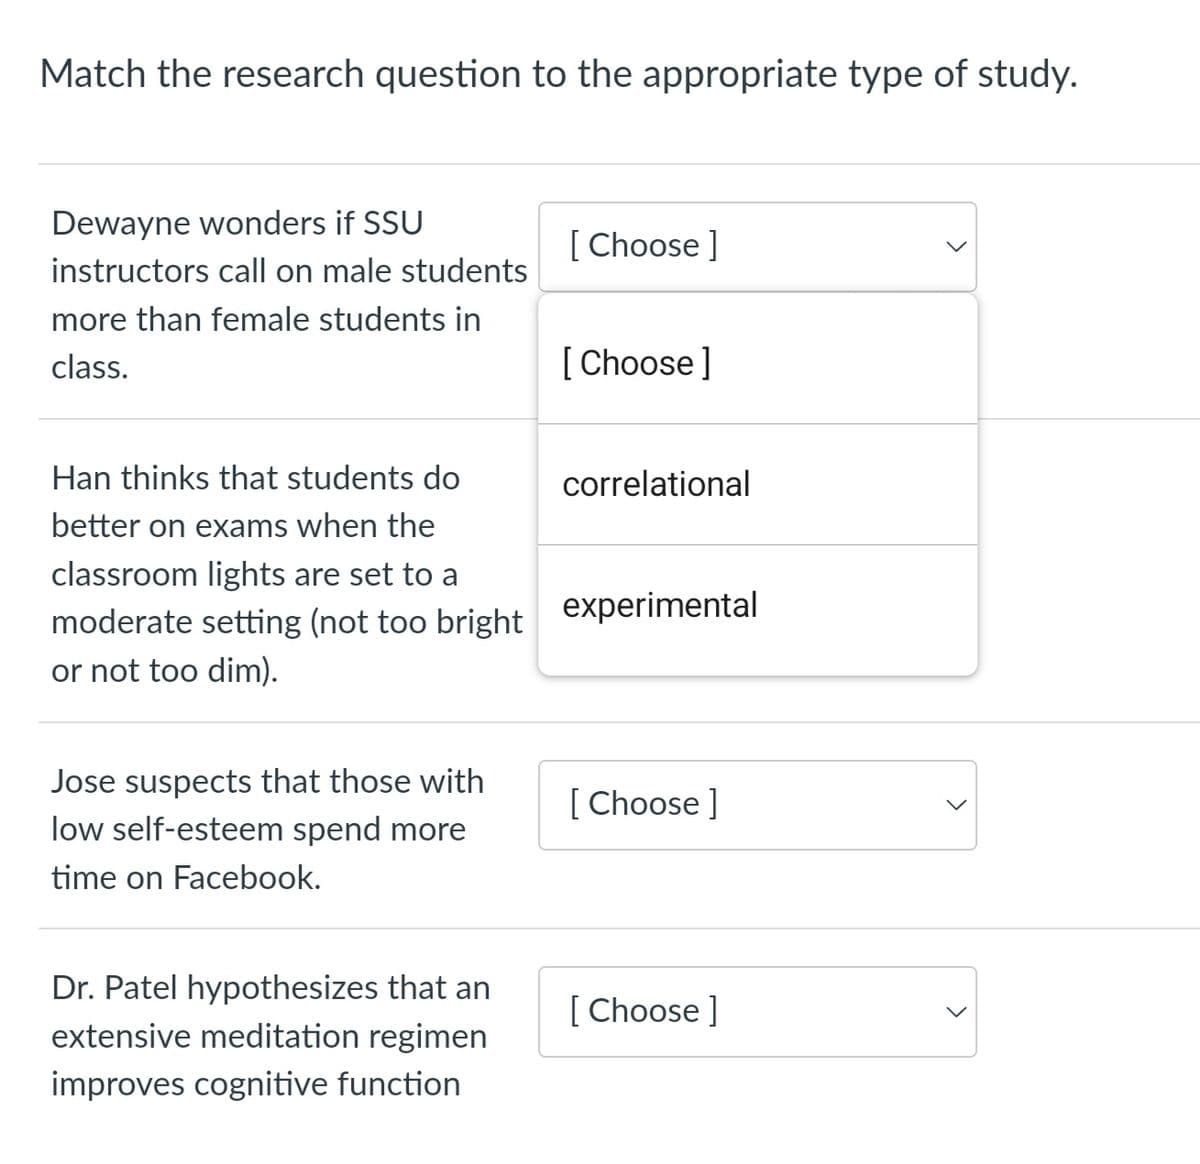 Match the research question to the appropriate type of study.
Dewayne wonders if SSU
instructors call on male students
more than female students in
class.
Jose suspects that those with
low self-esteem spend more
time on Facebook.
[Choose ]
Han thinks that students do
better on exams when the
classroom lights are set to a
moderate setting (not too bright experimental
or not too dim).
Dr. Patel hypothesizes that an
extensive meditation regimen
improves cognitive function
[Choose ]
correlational
[Choose ]
[Choose ]
>
<